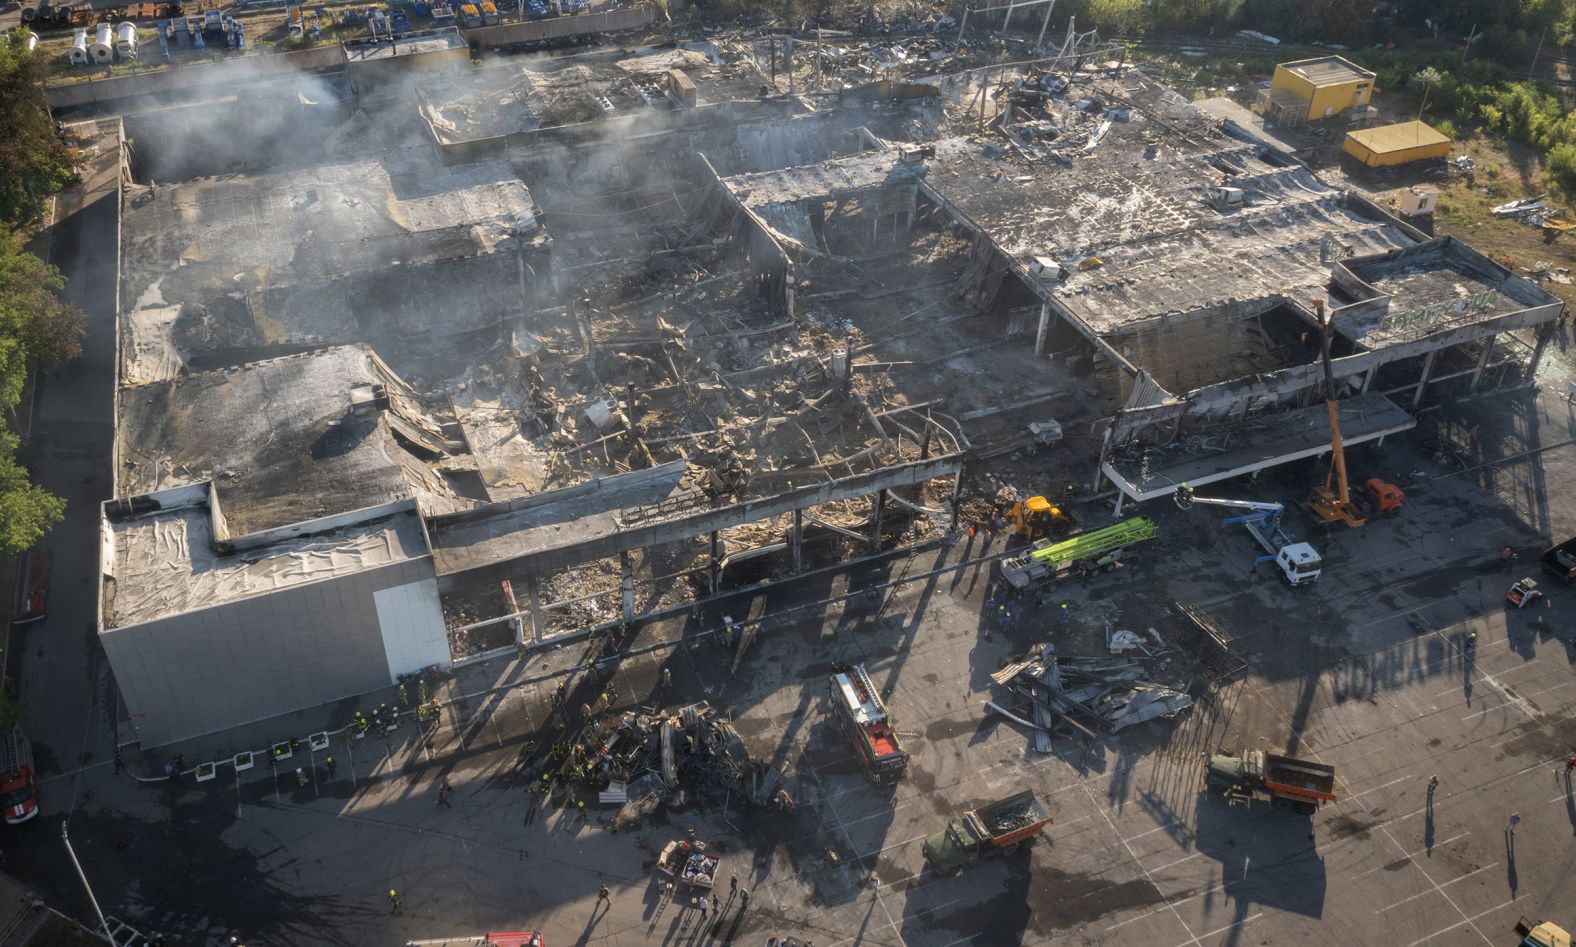 Ukrainian State Emergency Service firefighters work to take away debris at a shopping mall after a <a href="index.php?page=&url=https%3A%2F%2Fedition.cnn.com%2Feurope%2Flive-news%2Frussia-ukraine-war-news-06-28-22%2Fh_f2e4cf15367437c654d2db5ed8fa9349" target="_blank">rocket attack in Kremenchuk</a>, Ukraine, on June 28.